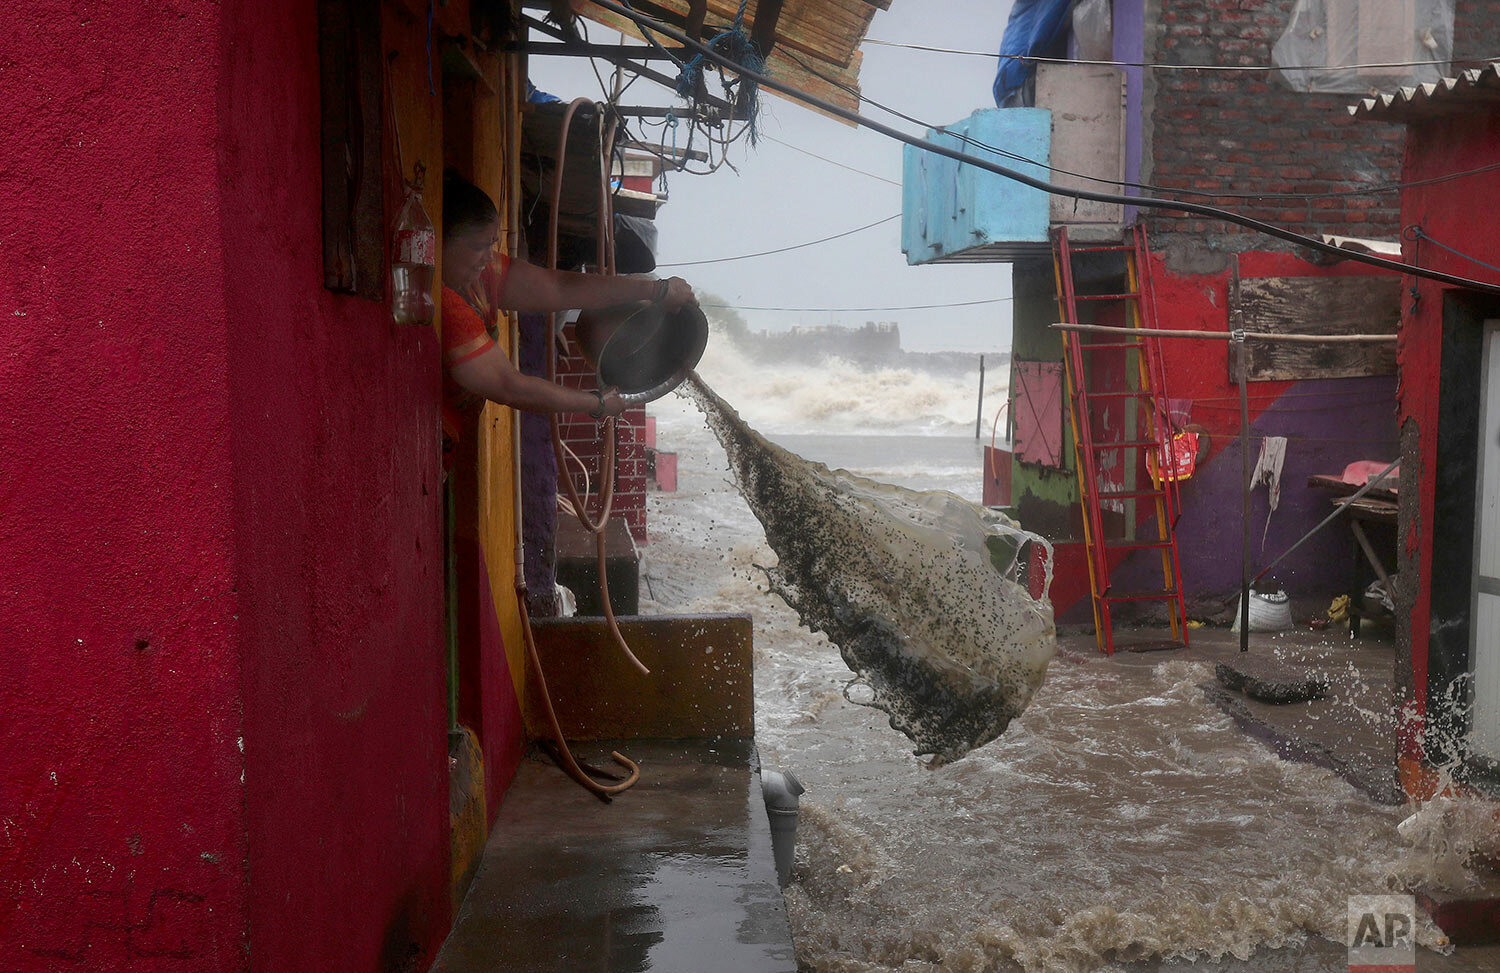  A woman tries to remove high tide water from her house at a shanty area on the Arabian Sea coast in Mumbai, India, Monday, July 6, 2020.  (AP Photo/Rafiq Maqbool) 